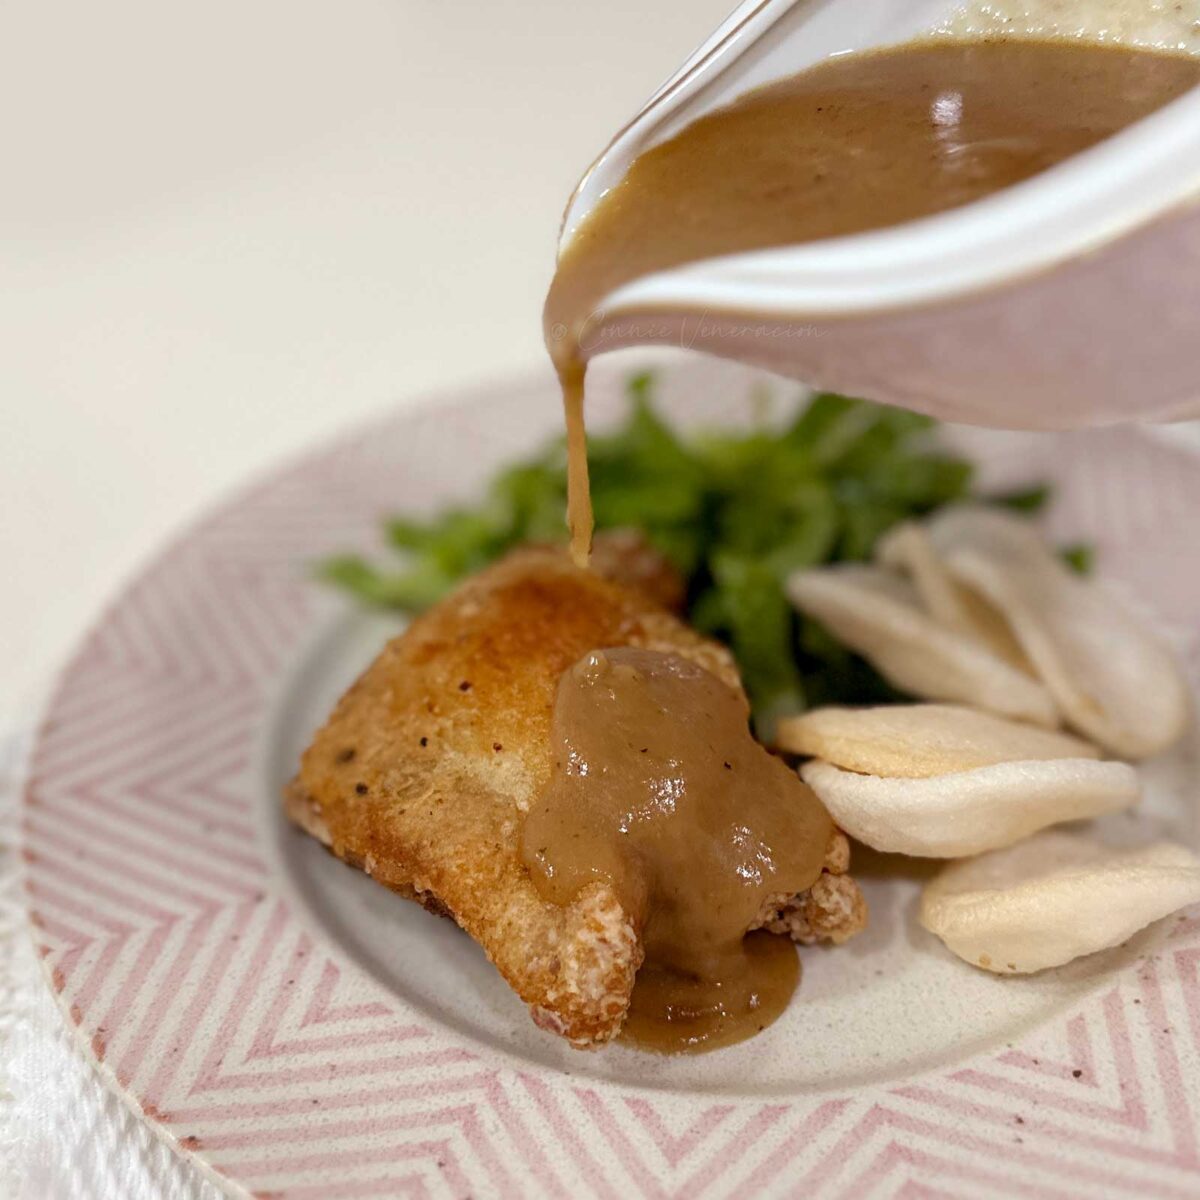 Pouring gravy over fried chicken